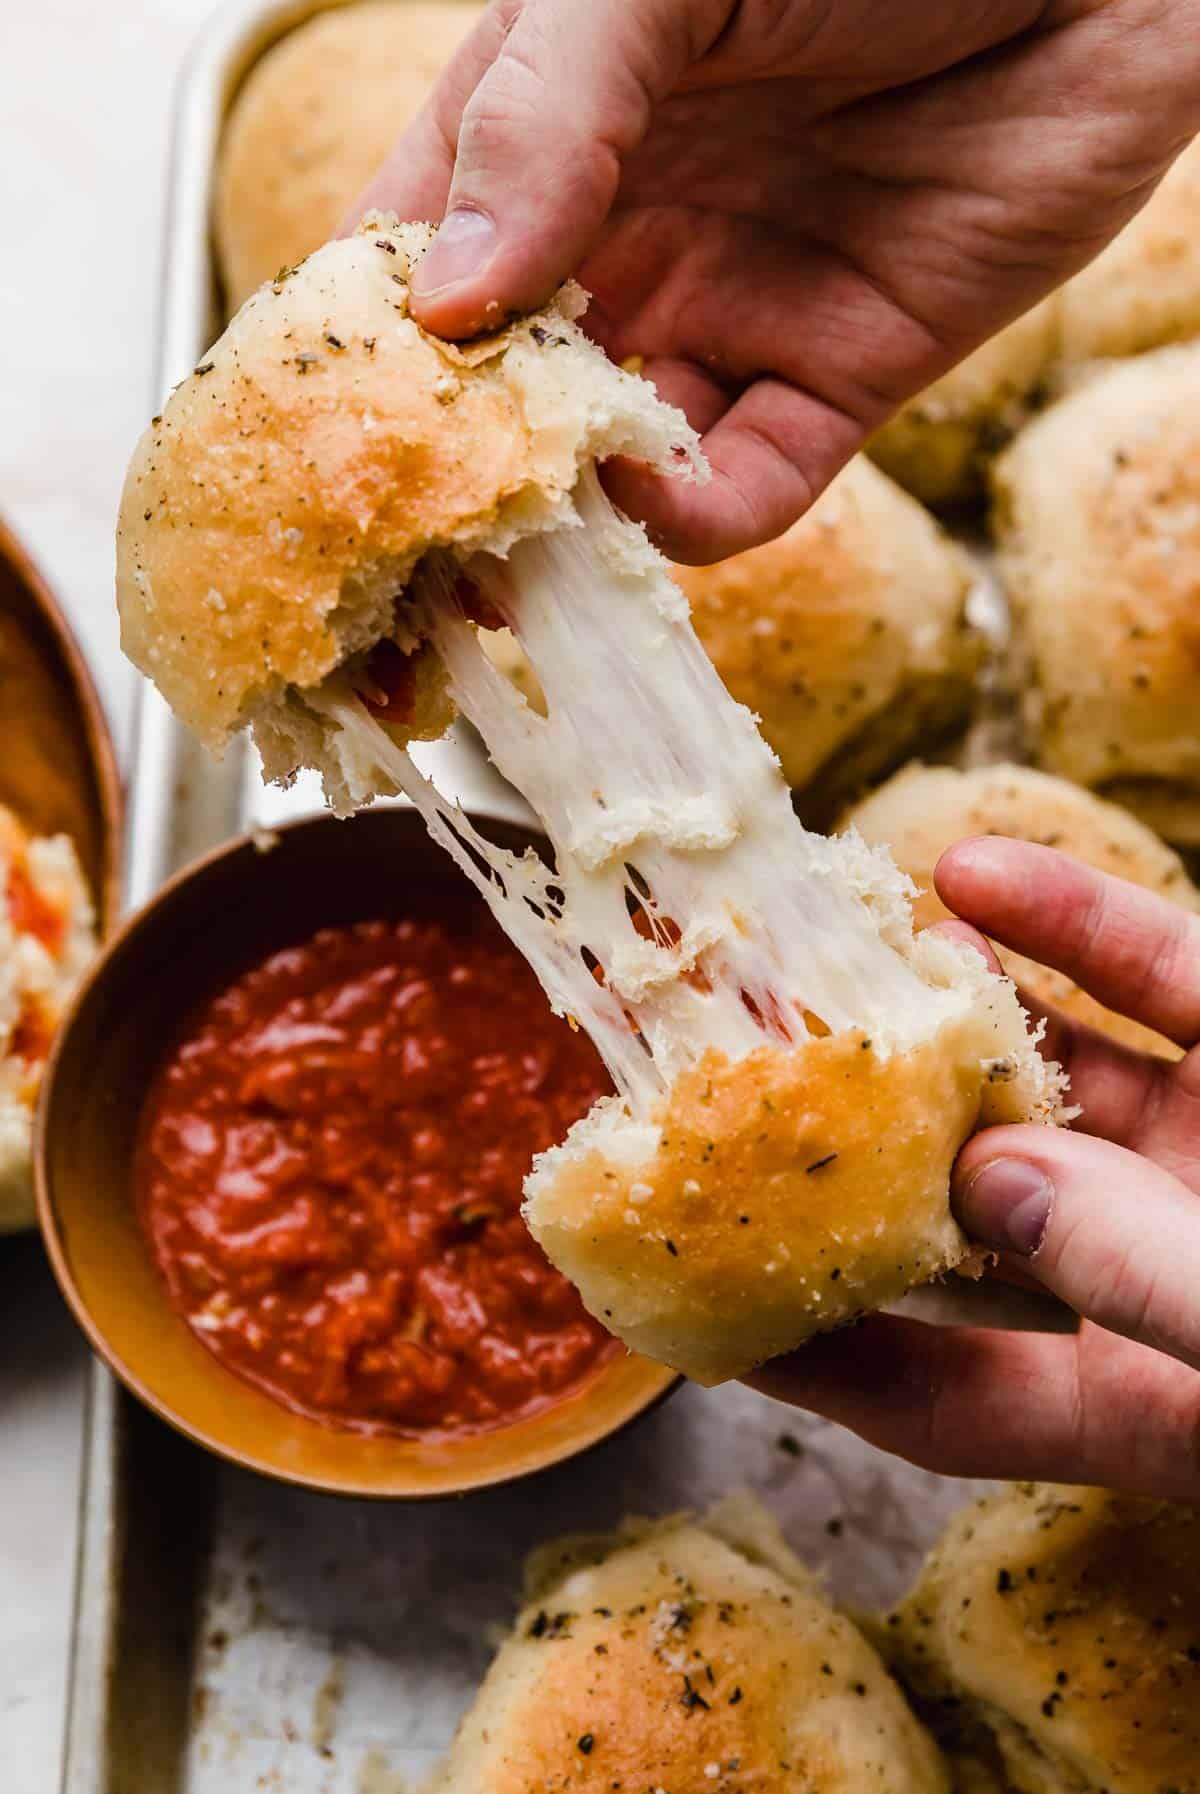 Two hands pulling a pizza roll apart showing the inside stretchy mozzarella cheese.